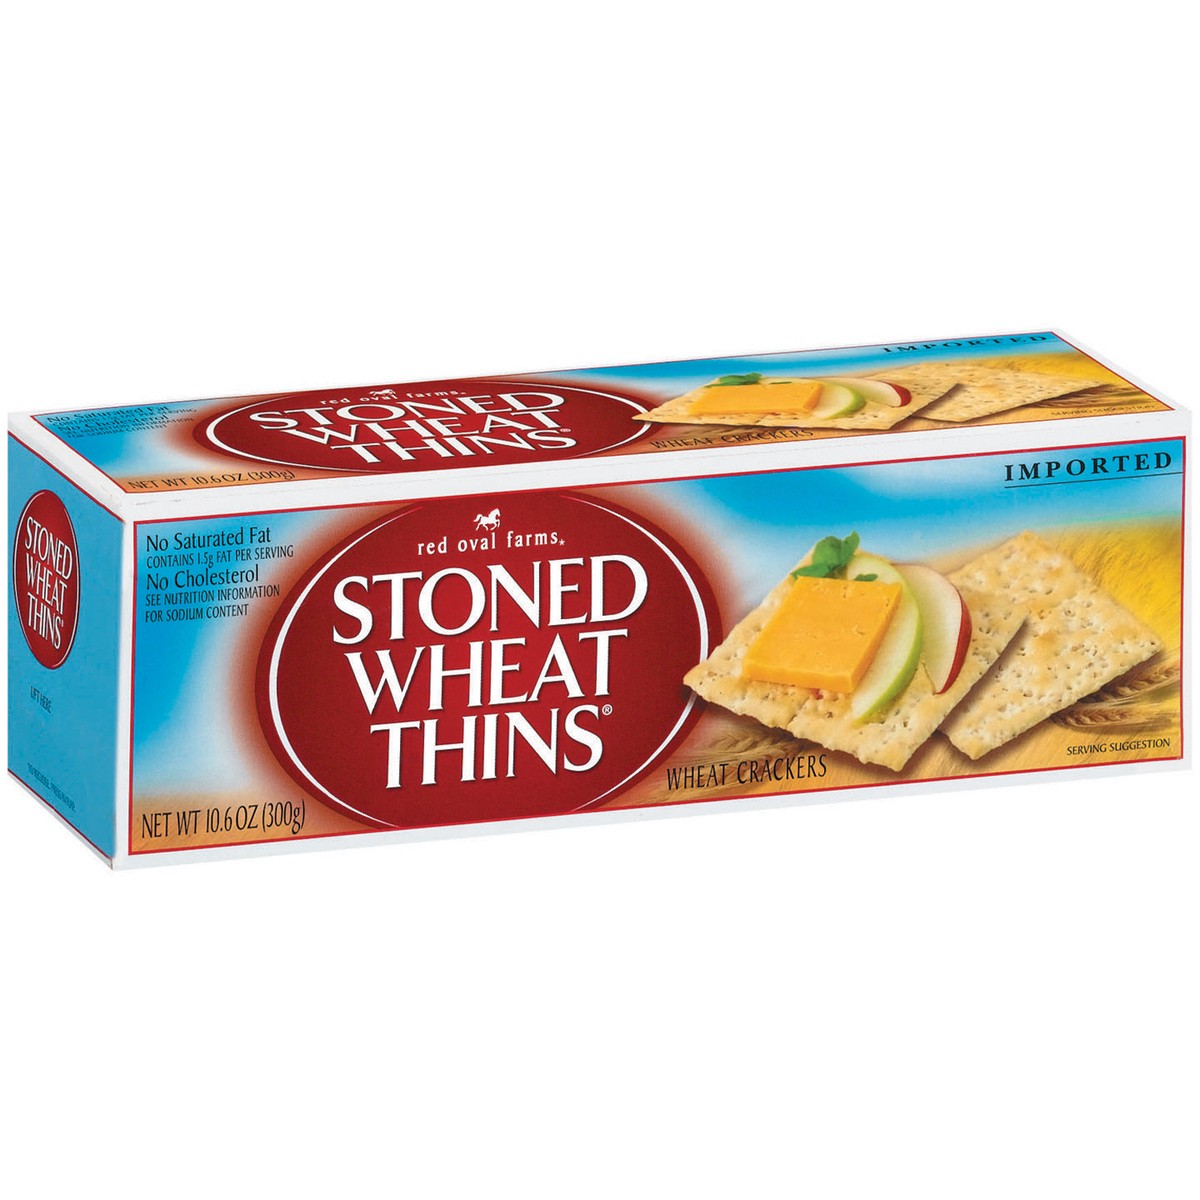 slide 2 of 4, Red Oval Farms Stoned Wheat Thins Crackers, 10.6 oz, 0.66 lb